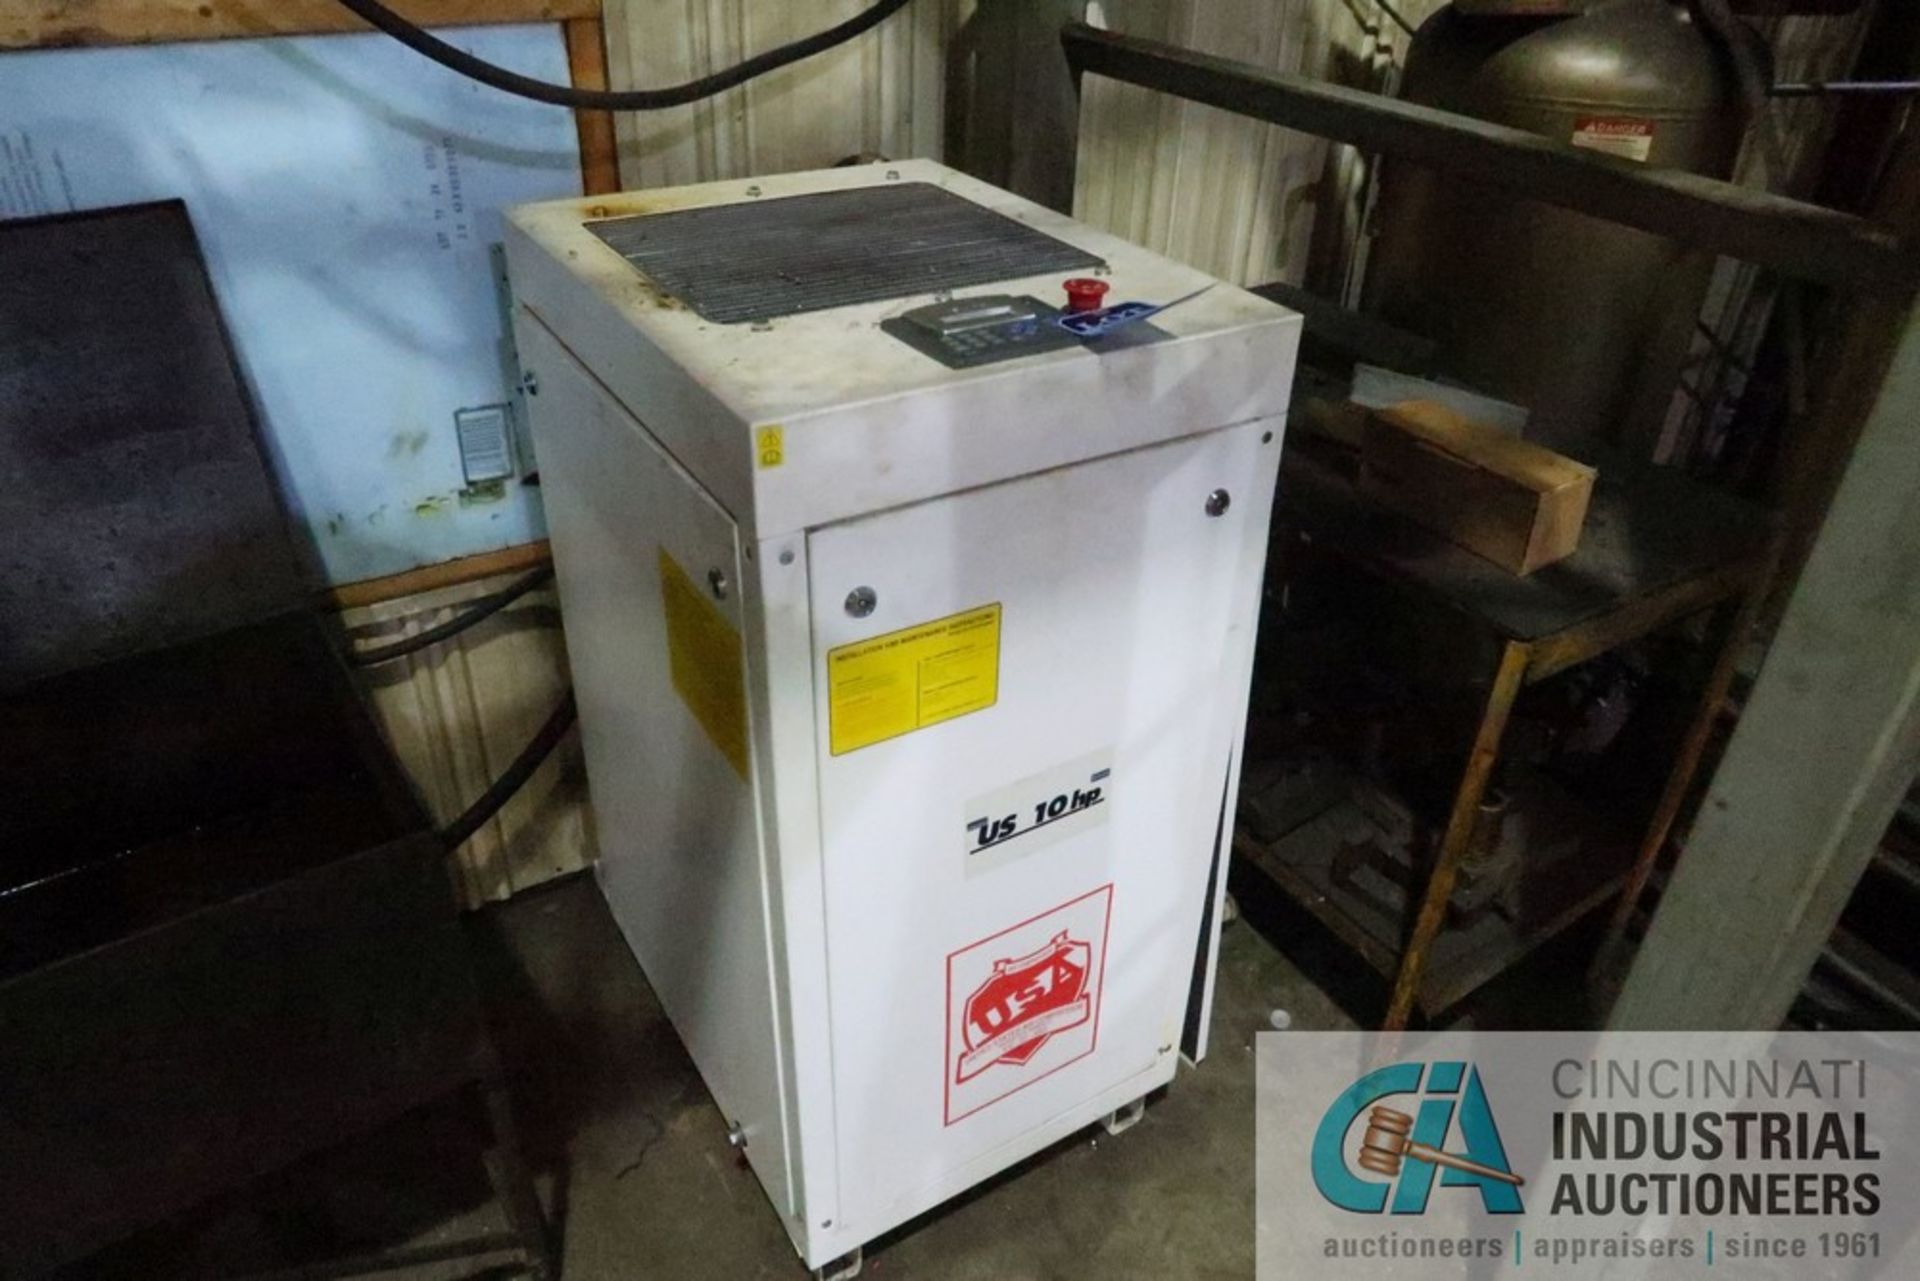 US AIR REFRIGERATED AIR DRYER